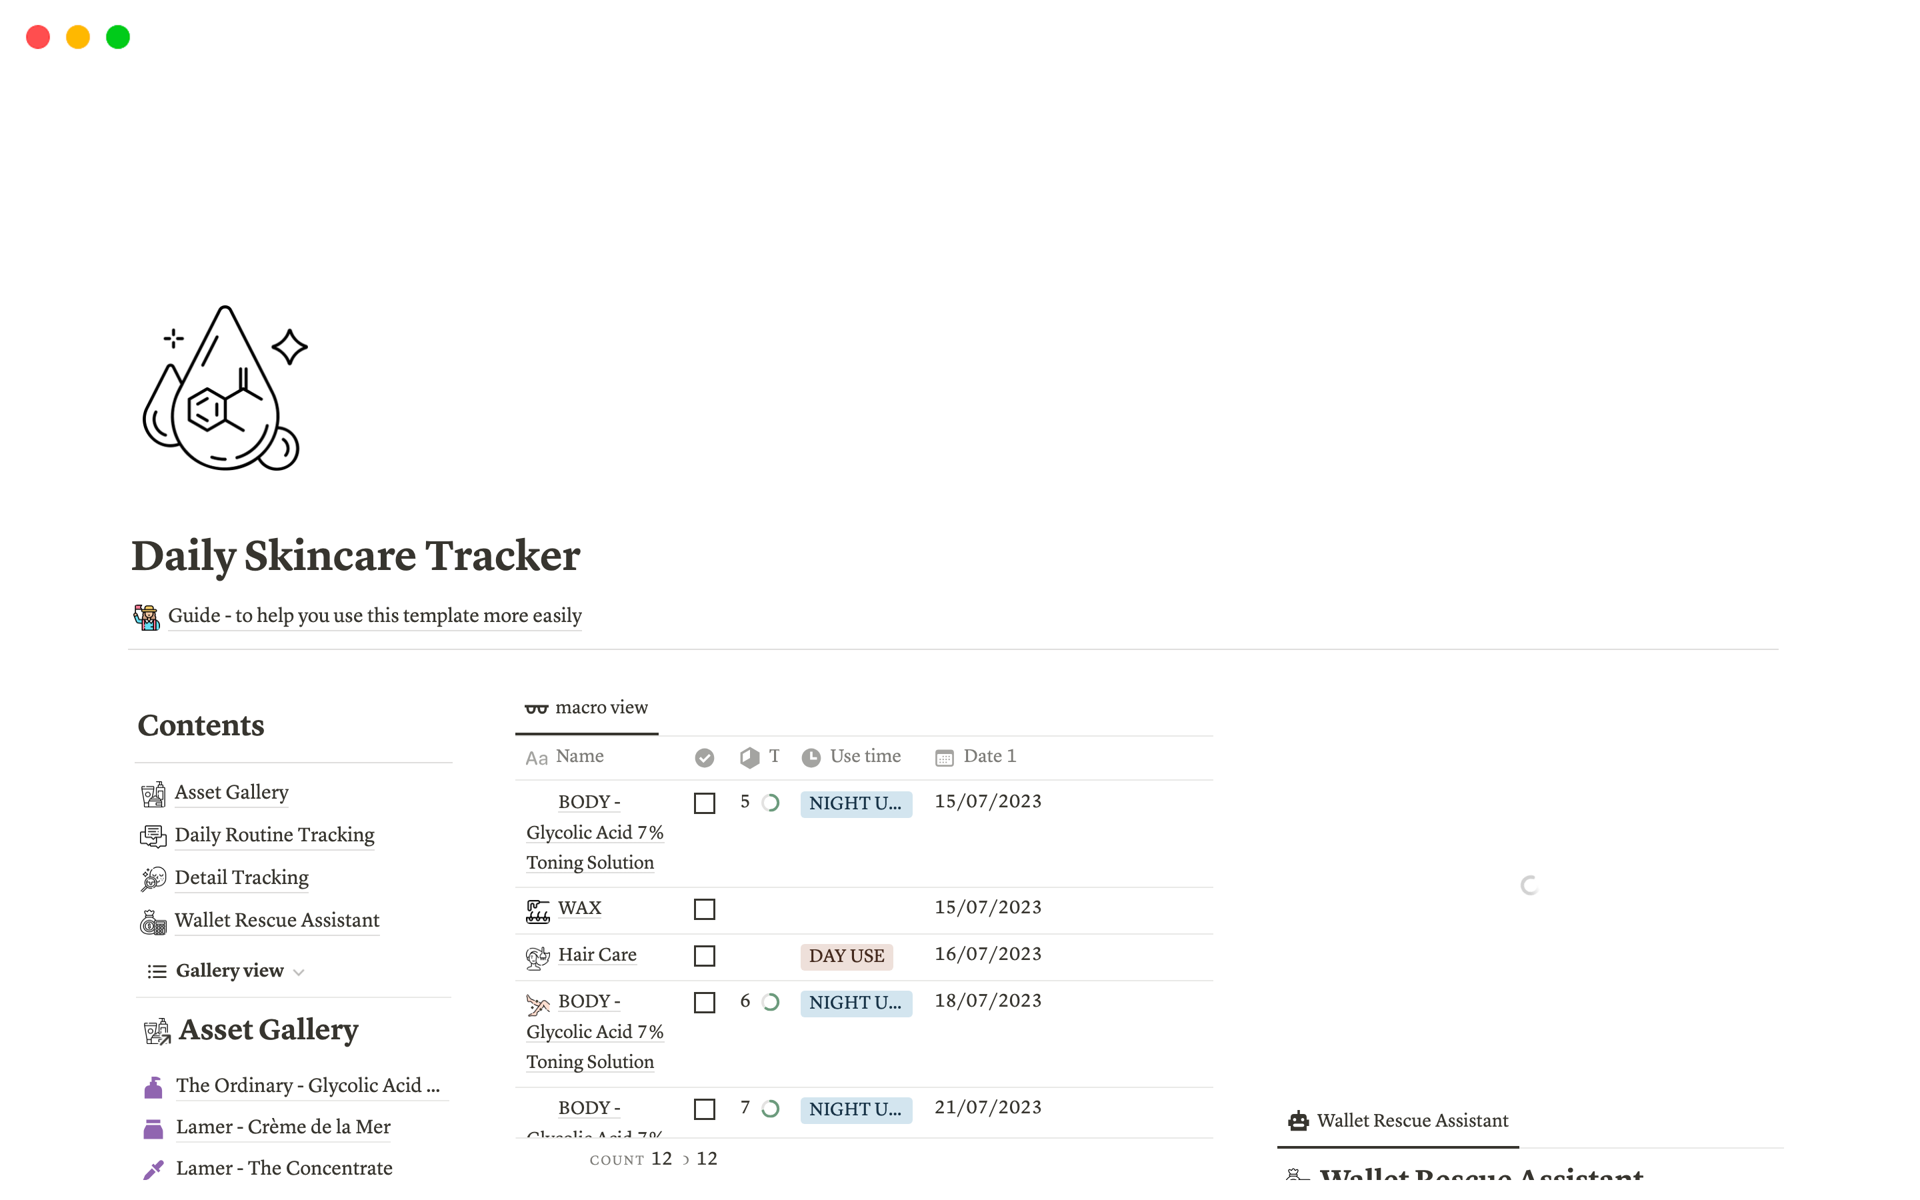 The Daily Skincare Tracker is a customizable Notion template that helps users keep track of their skincare routine, product usage, expenses, and progress.